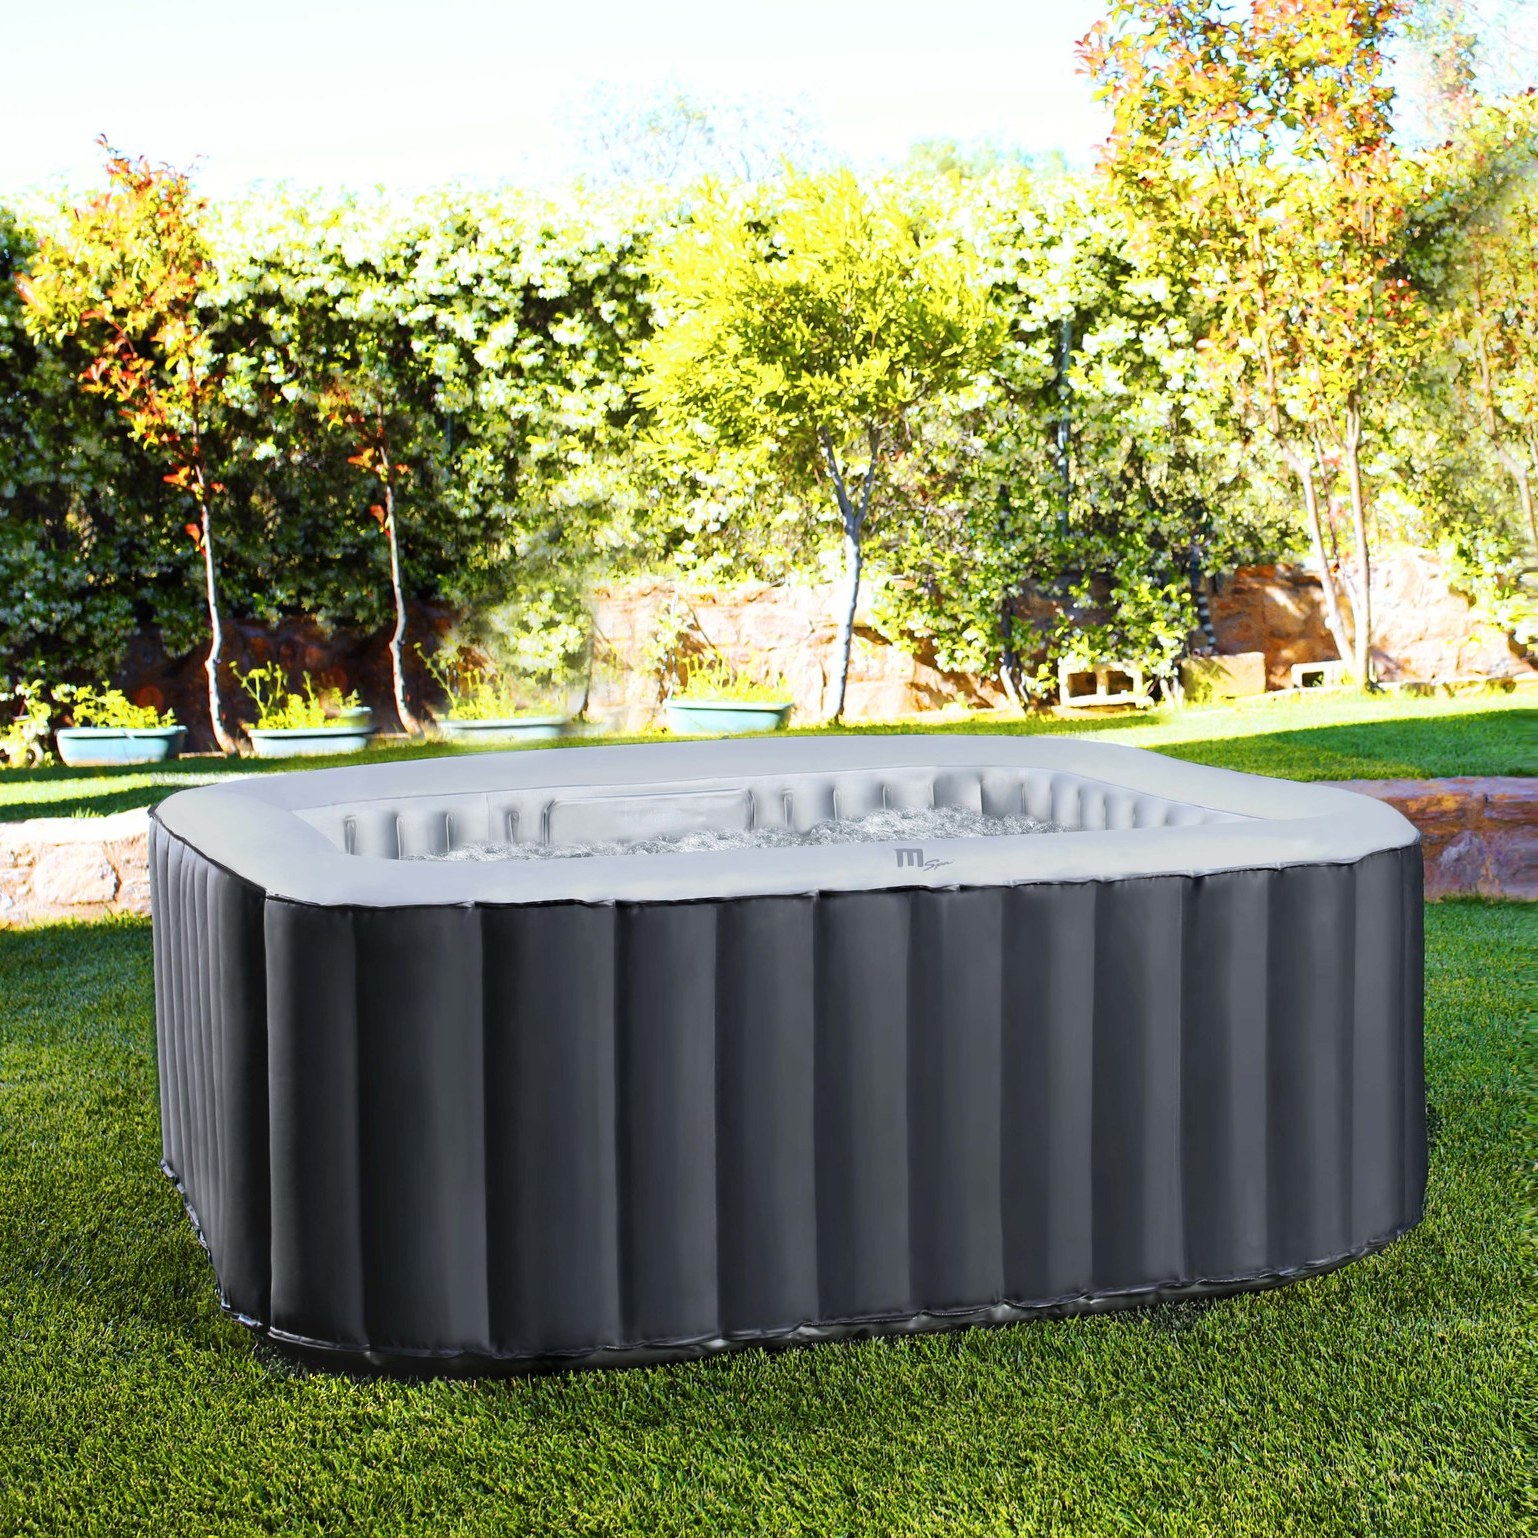 MSpa inflatable spas are high-quality, stylish and comfortable. Order yours now!  www.FavellsSpas.com » Outdoor Furniture Fuengirola, Costa Del Sol, Spain